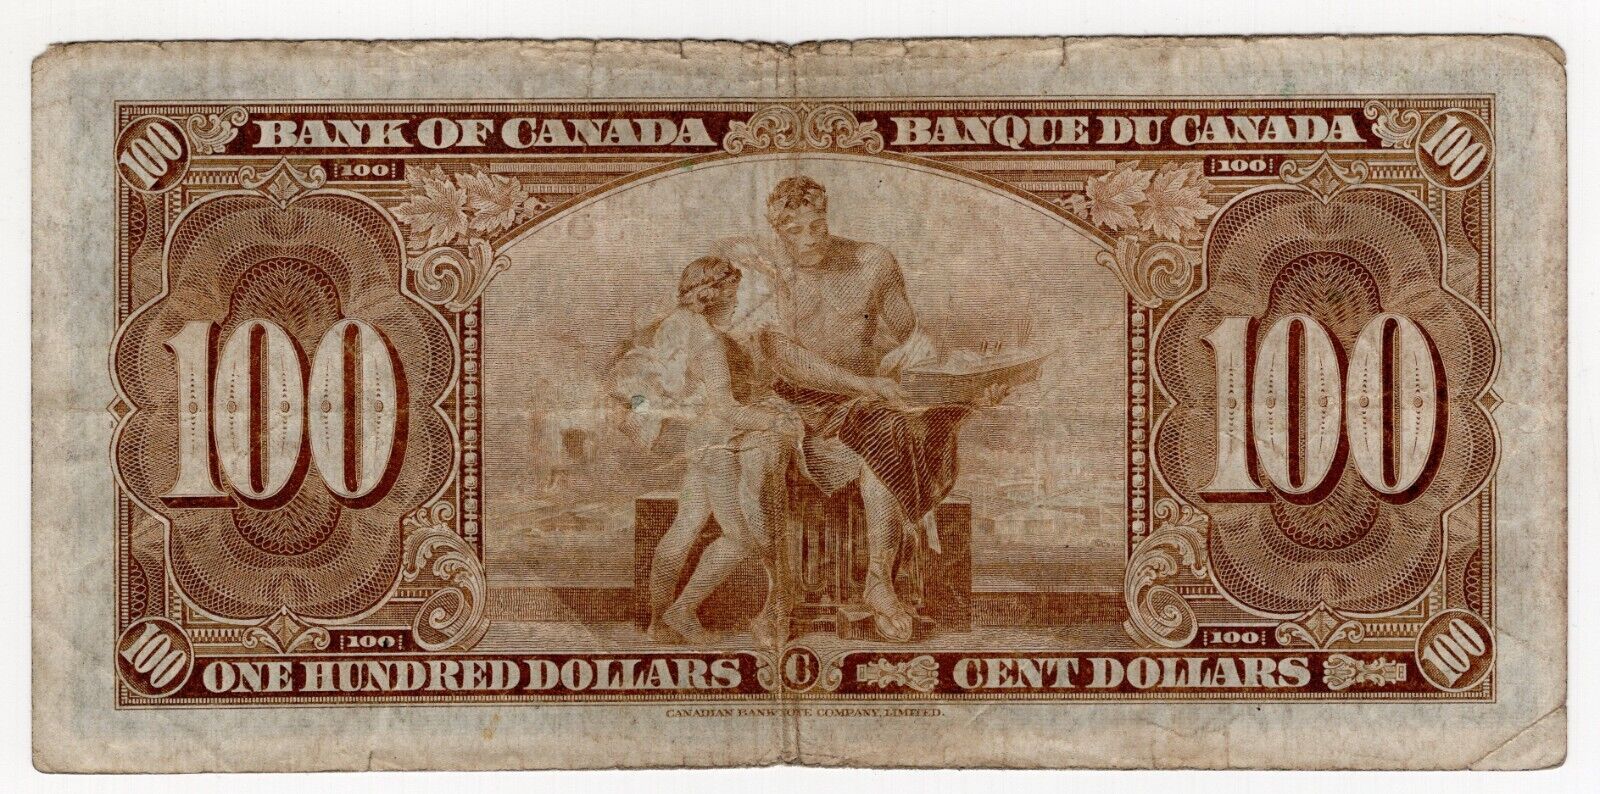 1937 BANK OF CANADA ONE HUNDRED 100 DOLLAR BANK NOTE BJ 3398616 NICE BILL